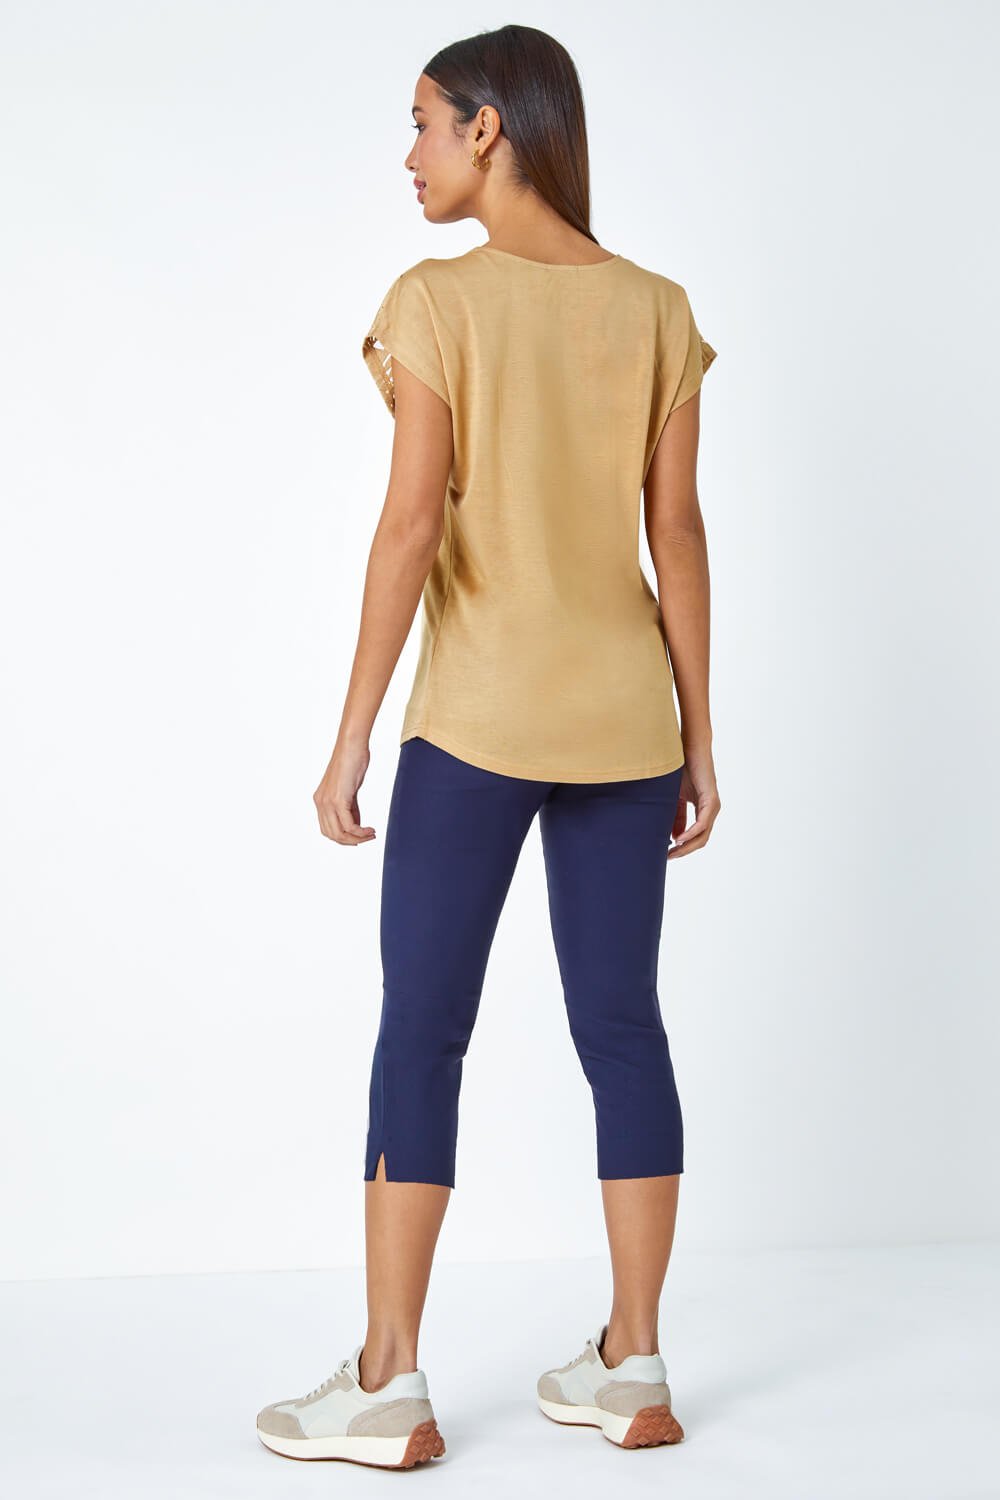 Gold Embellished Palm Print Cut Out T-Shirt, Image 3 of 5